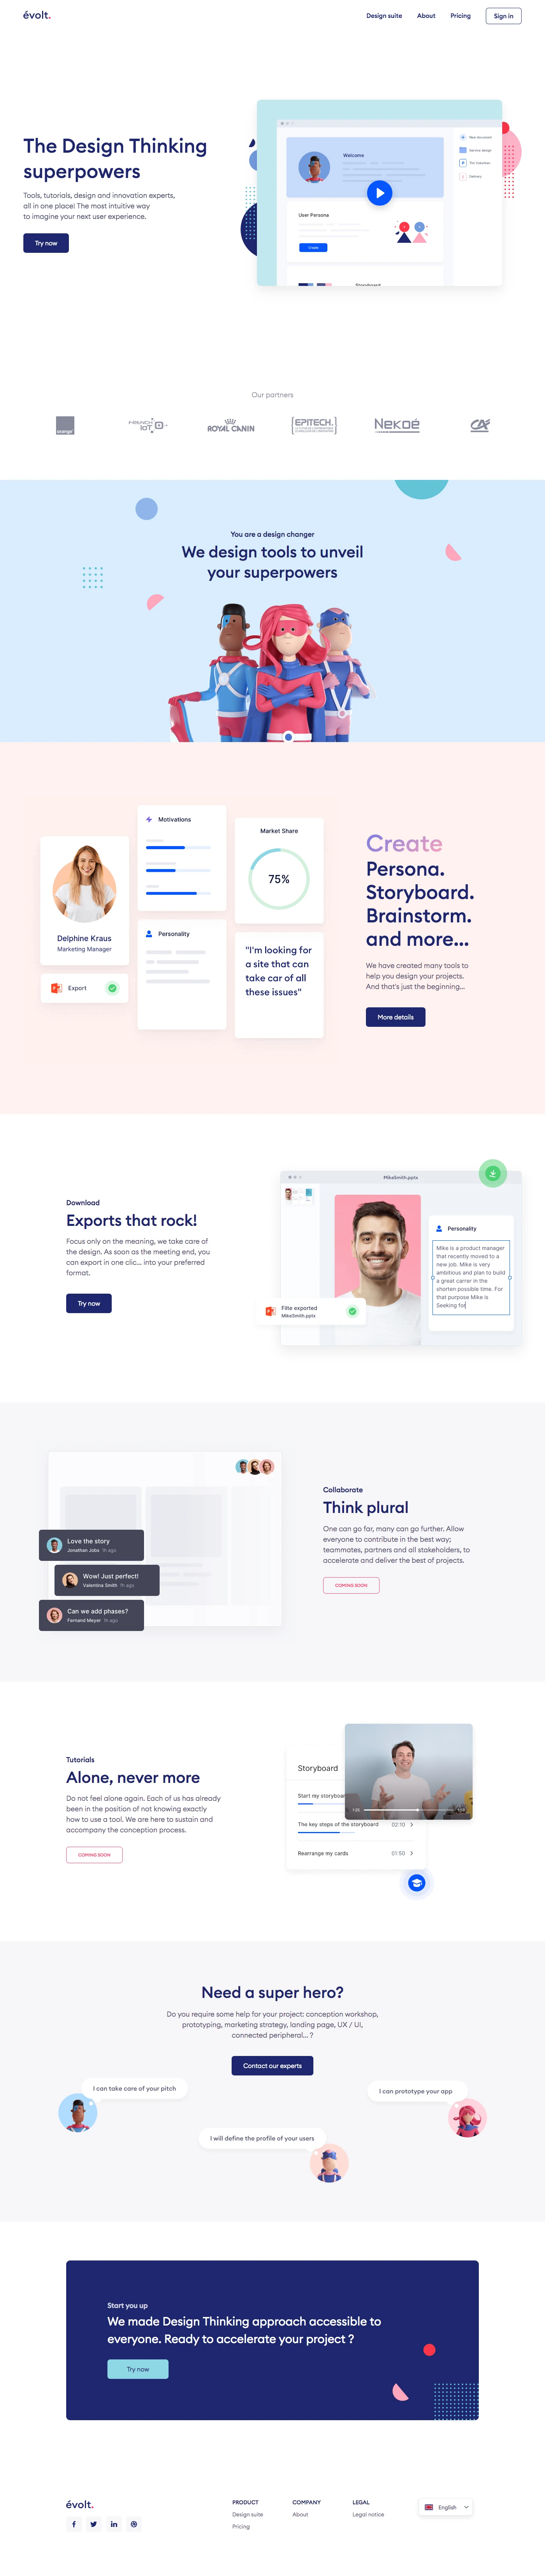 évolt Landing Page Example: Tools, tutorials, design and innovation experts, all in one place! The most intuitive way to imagine your next user experience.